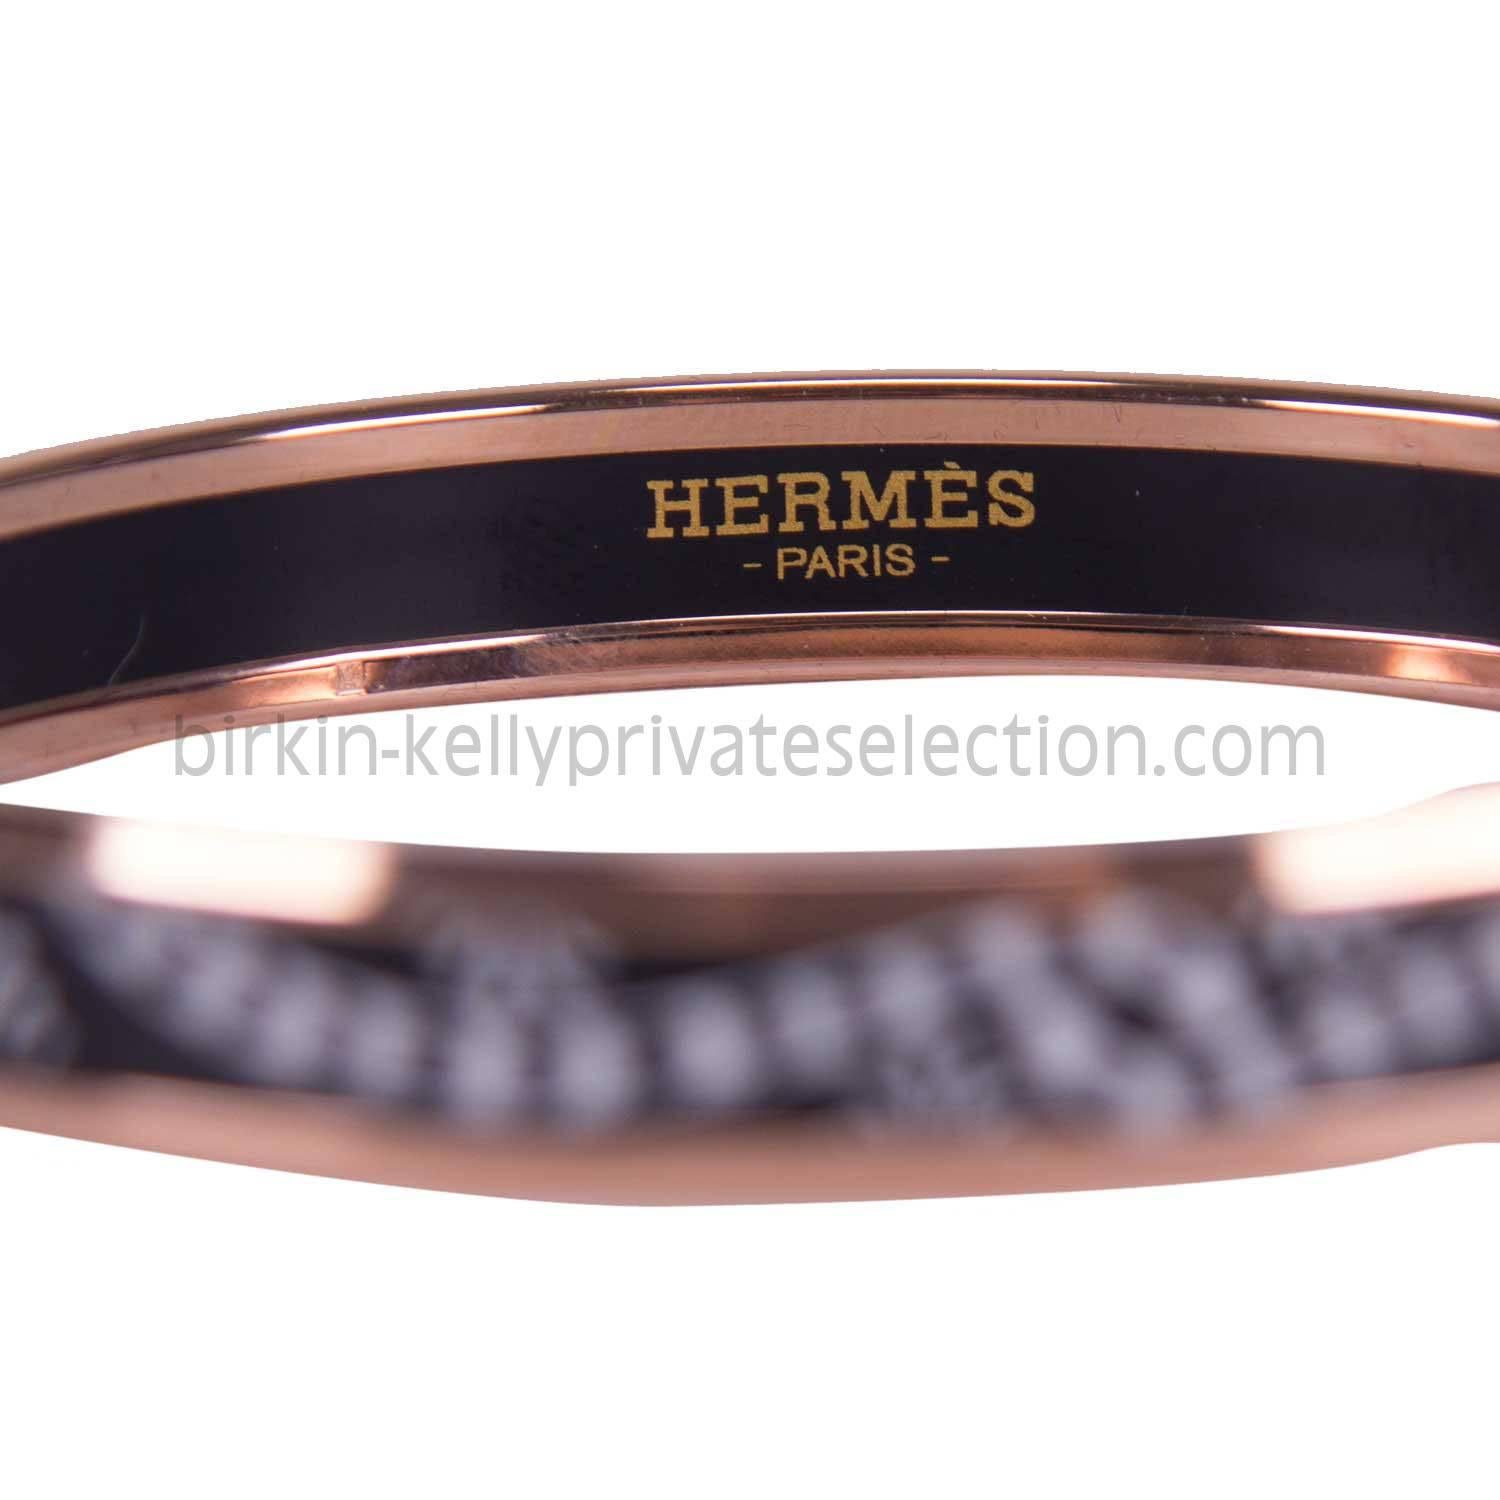 HERMES BRACELET FIN LES LEOPARDS EMAIL PLAQUE OR ROSE Positive Negative 2015.

Pre-owned and never used.

Bought it in Hermes store in 2015.

Size; S.

Color; Noir, Or rose

Model; LES LEOPARDS EMAIL PLAQUE.

-Original